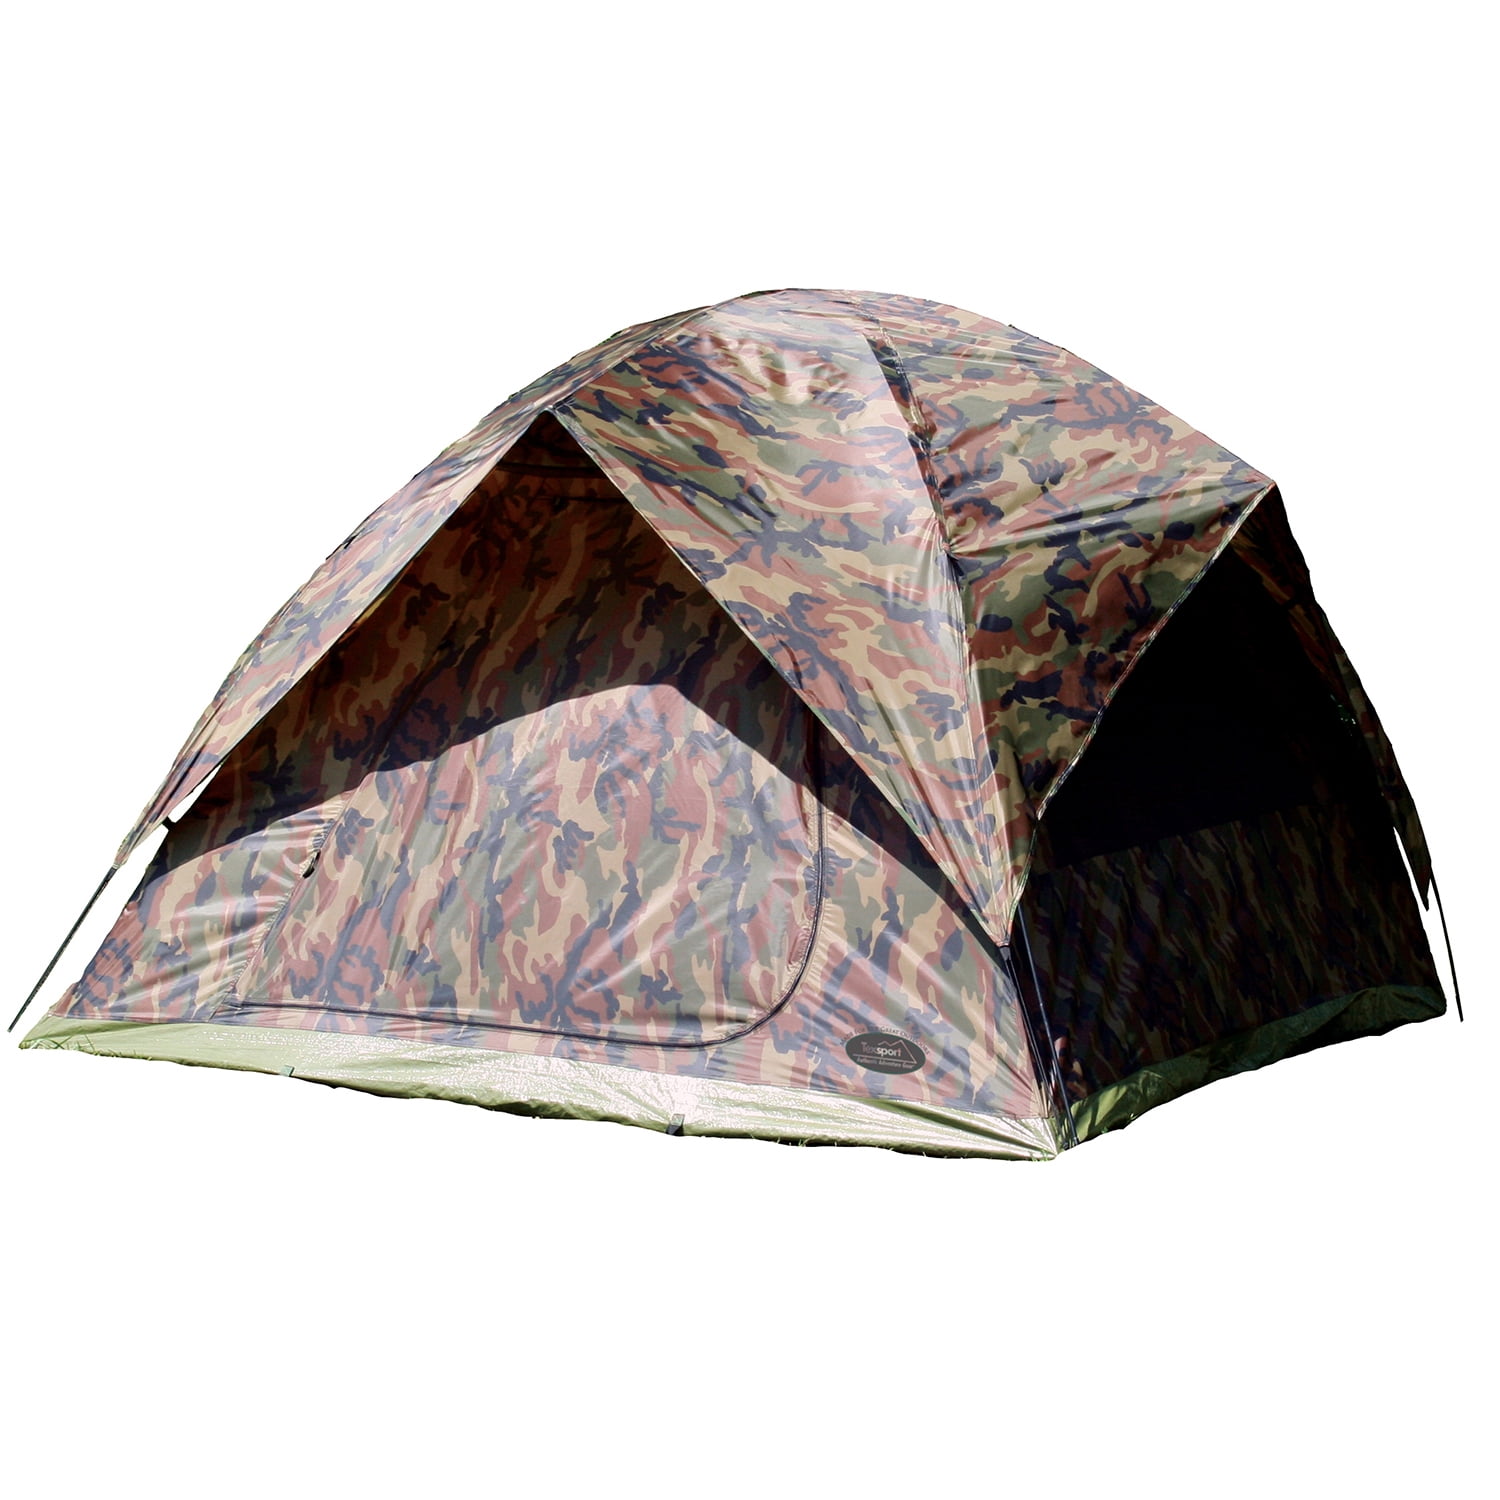 Texsport Headquarters Camouflage 9' x 9' Square Dome Tent, Sleeps 5